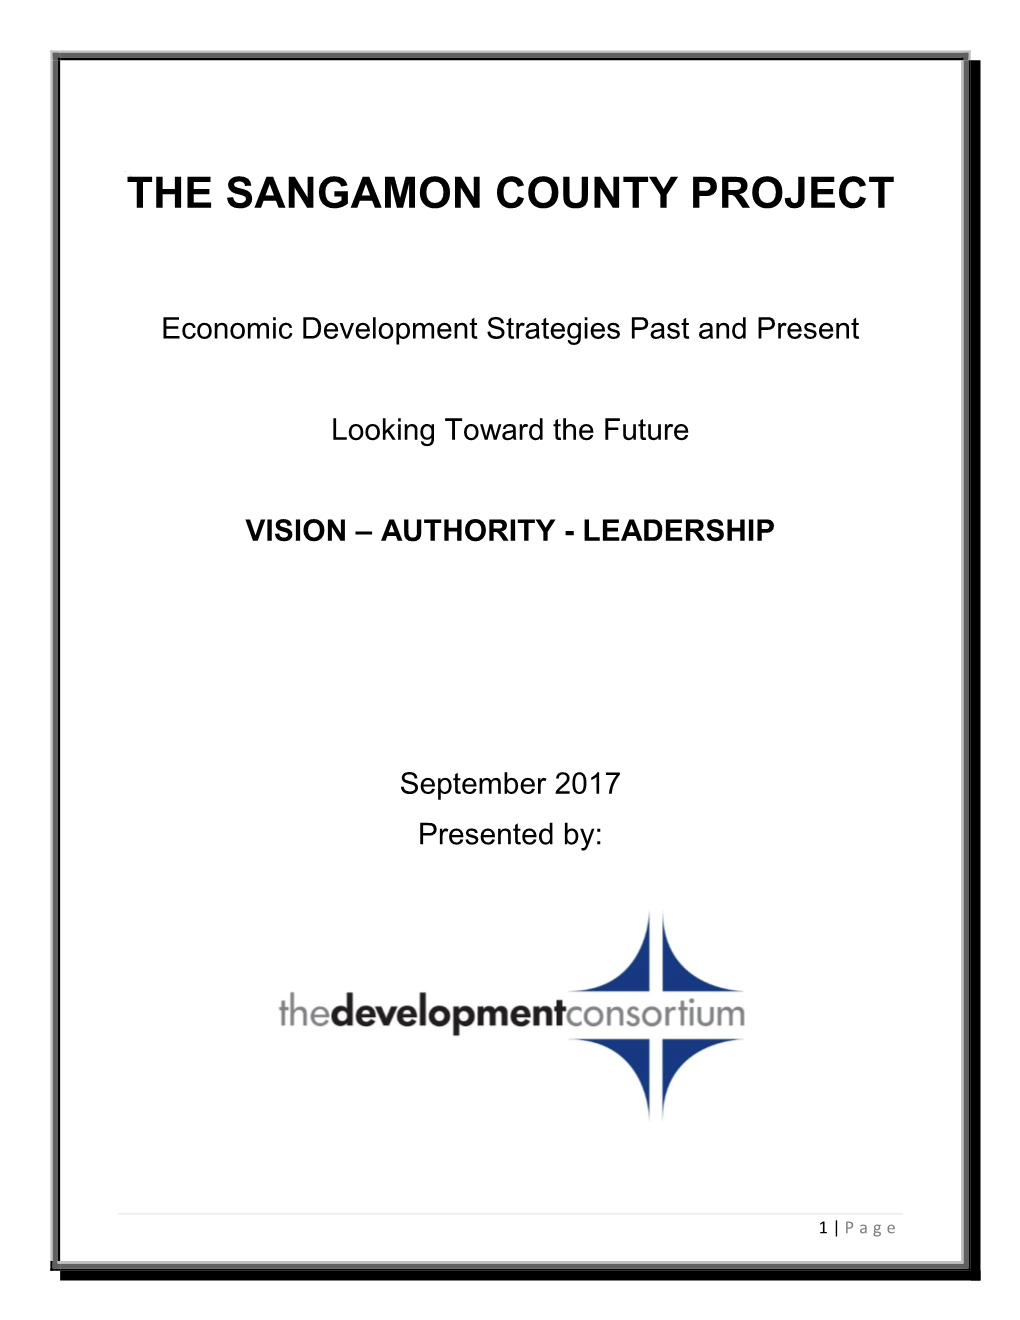 The Sangamon County Project